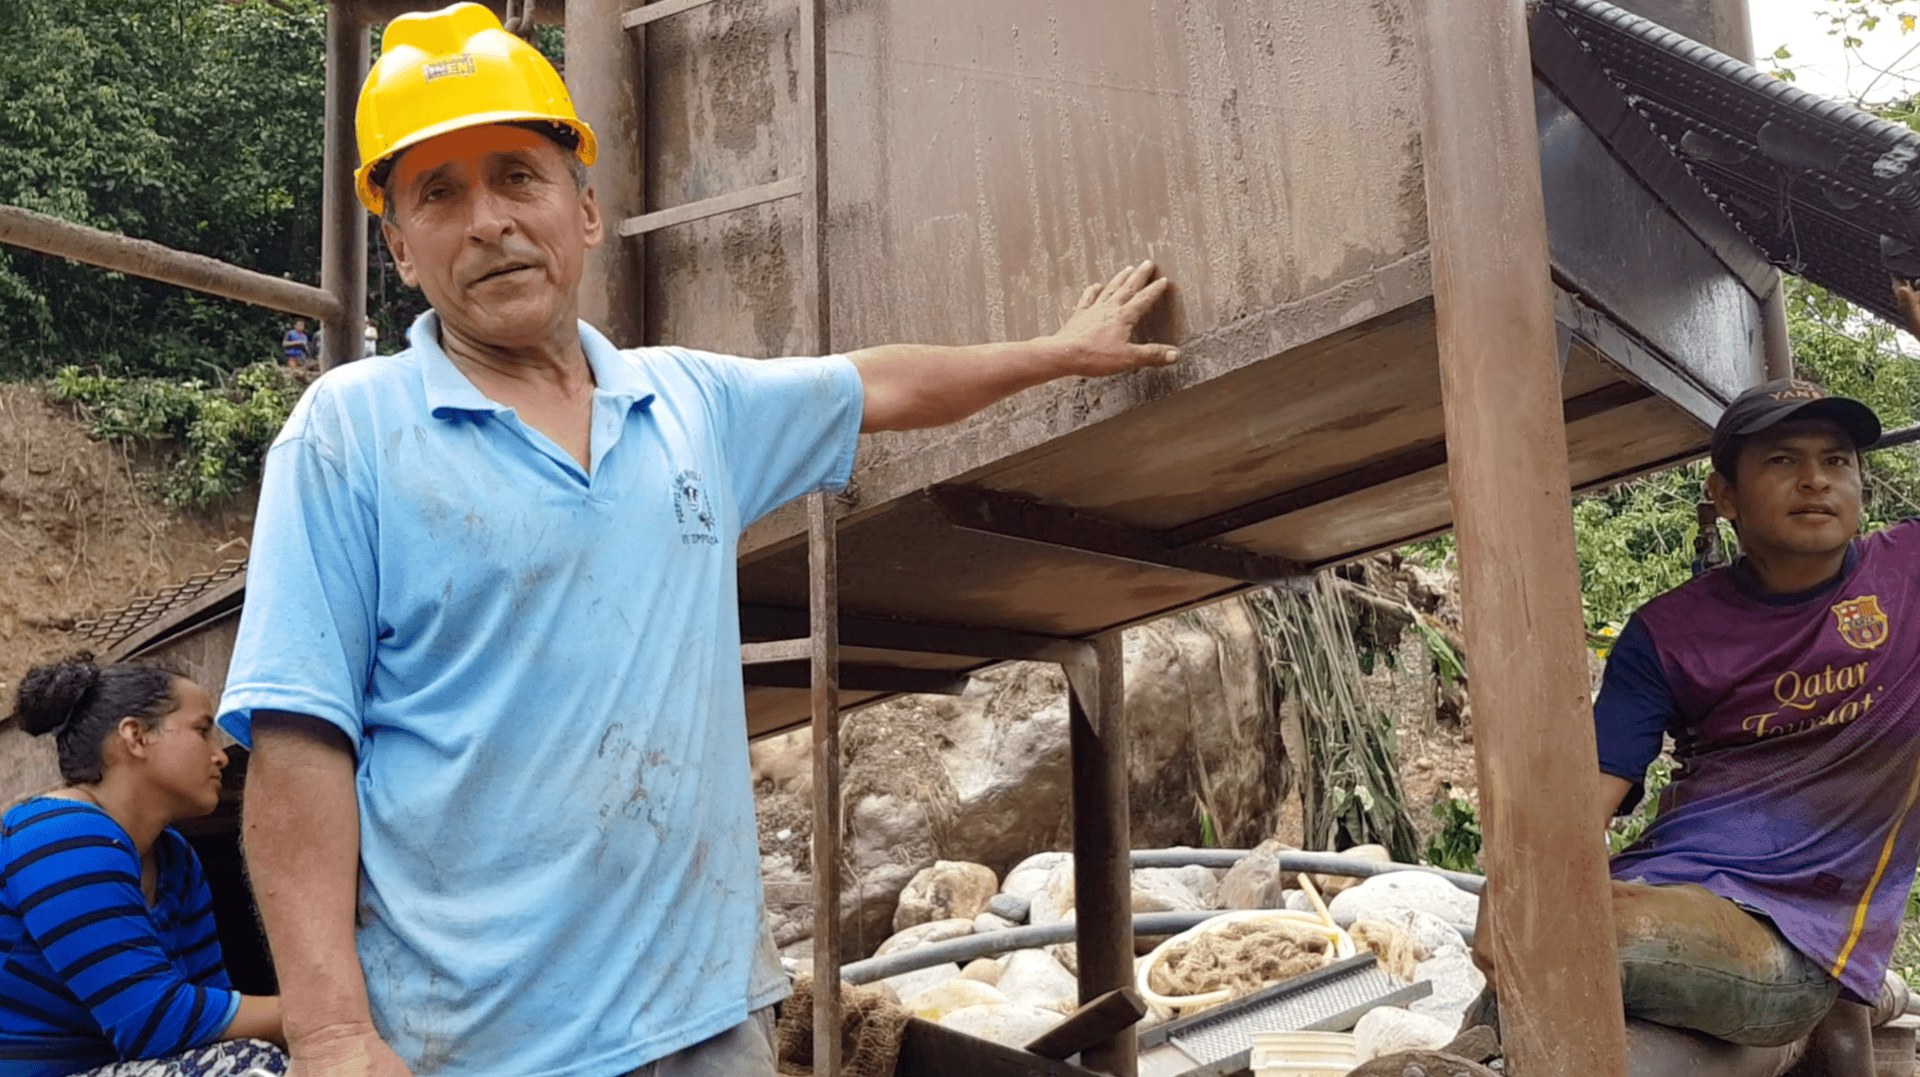 “Joselito” and two of the other miners at the new site discovered by the A’I Cofan. Joselito identified the woman behind him as the “boss.” Photograph: Nicolas Mainville/Amazon Frontlines